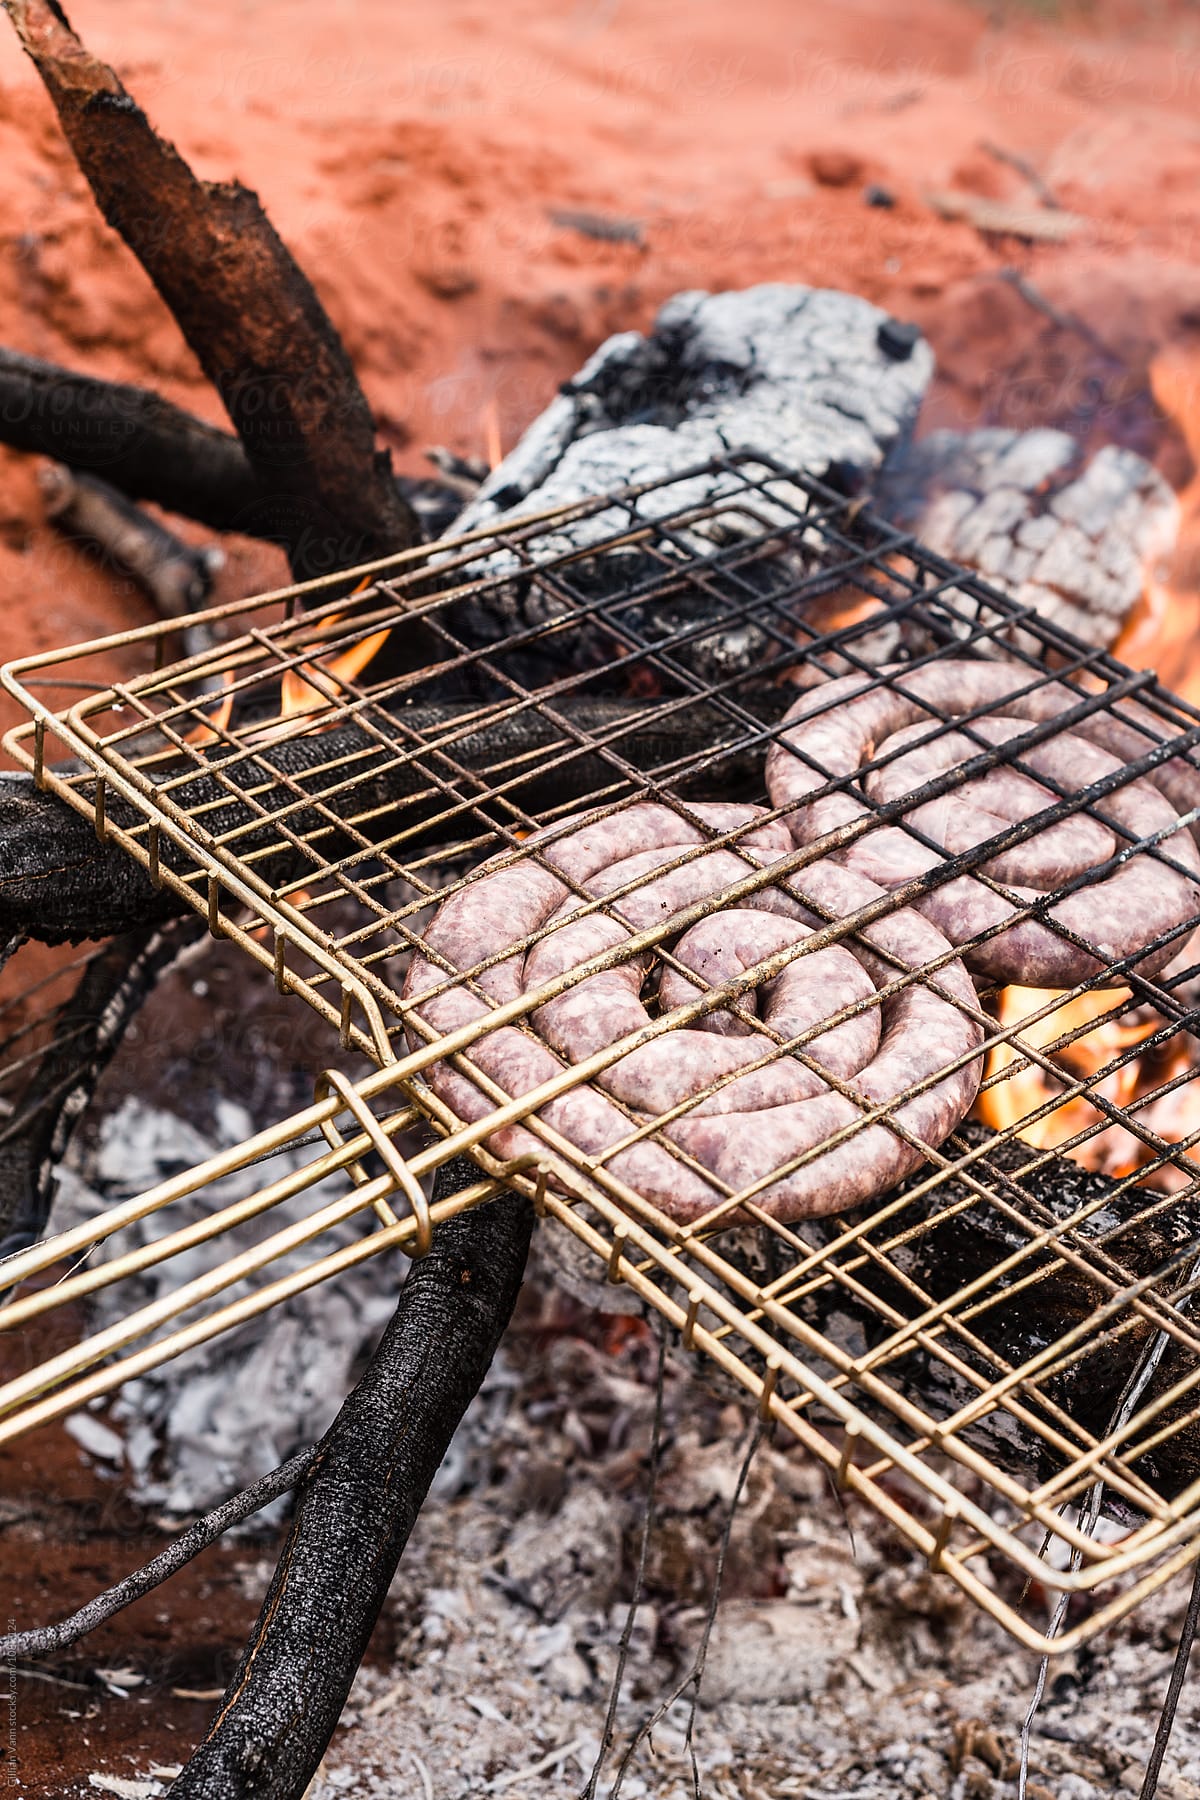 cooking boerwors sausage on an open fire in outback Australia